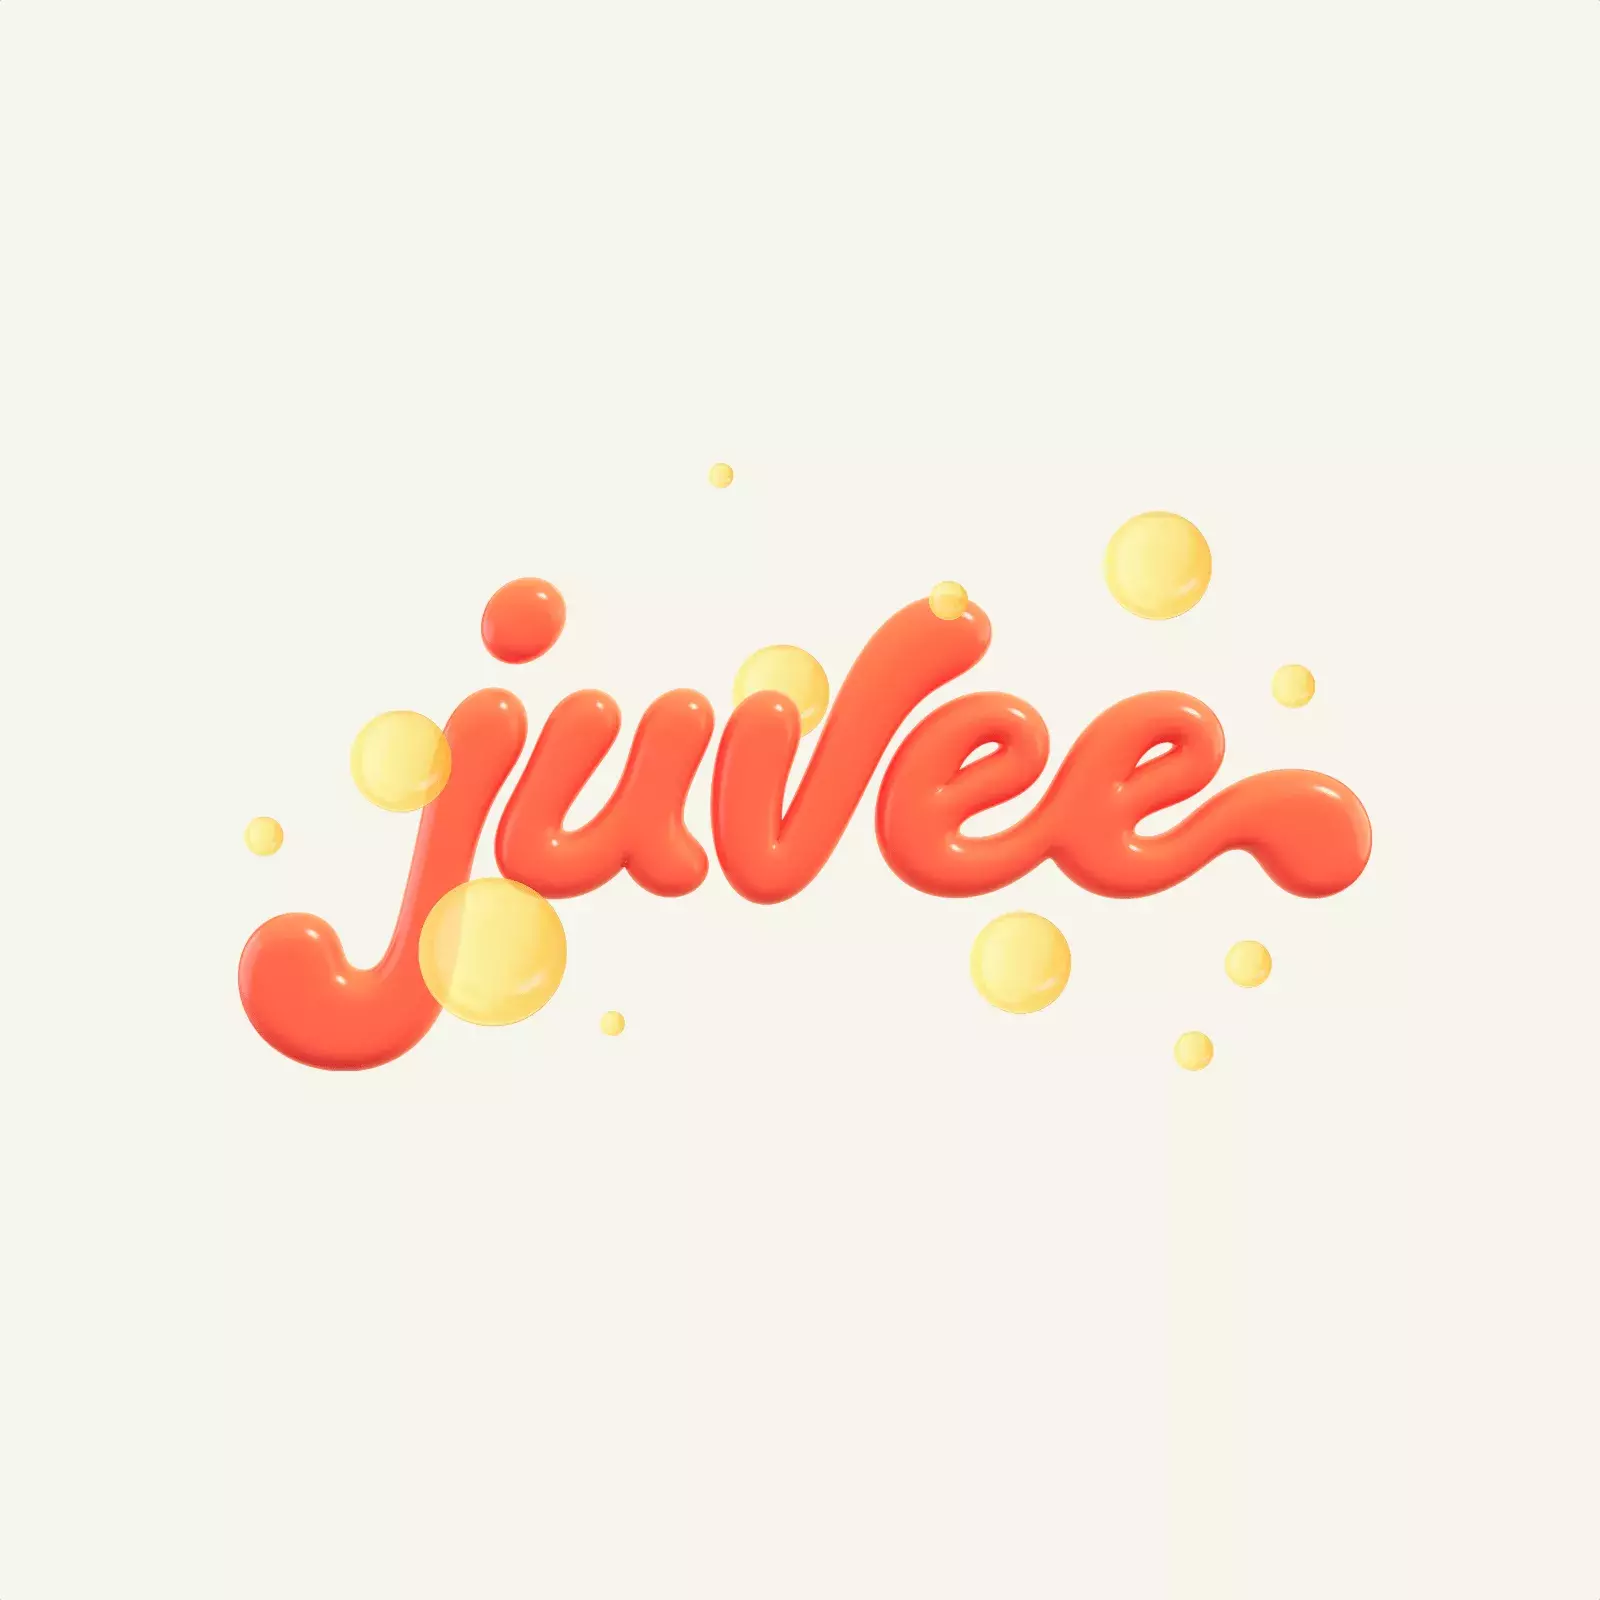 Zero targets inclusivity with designs for Juvee energy drink